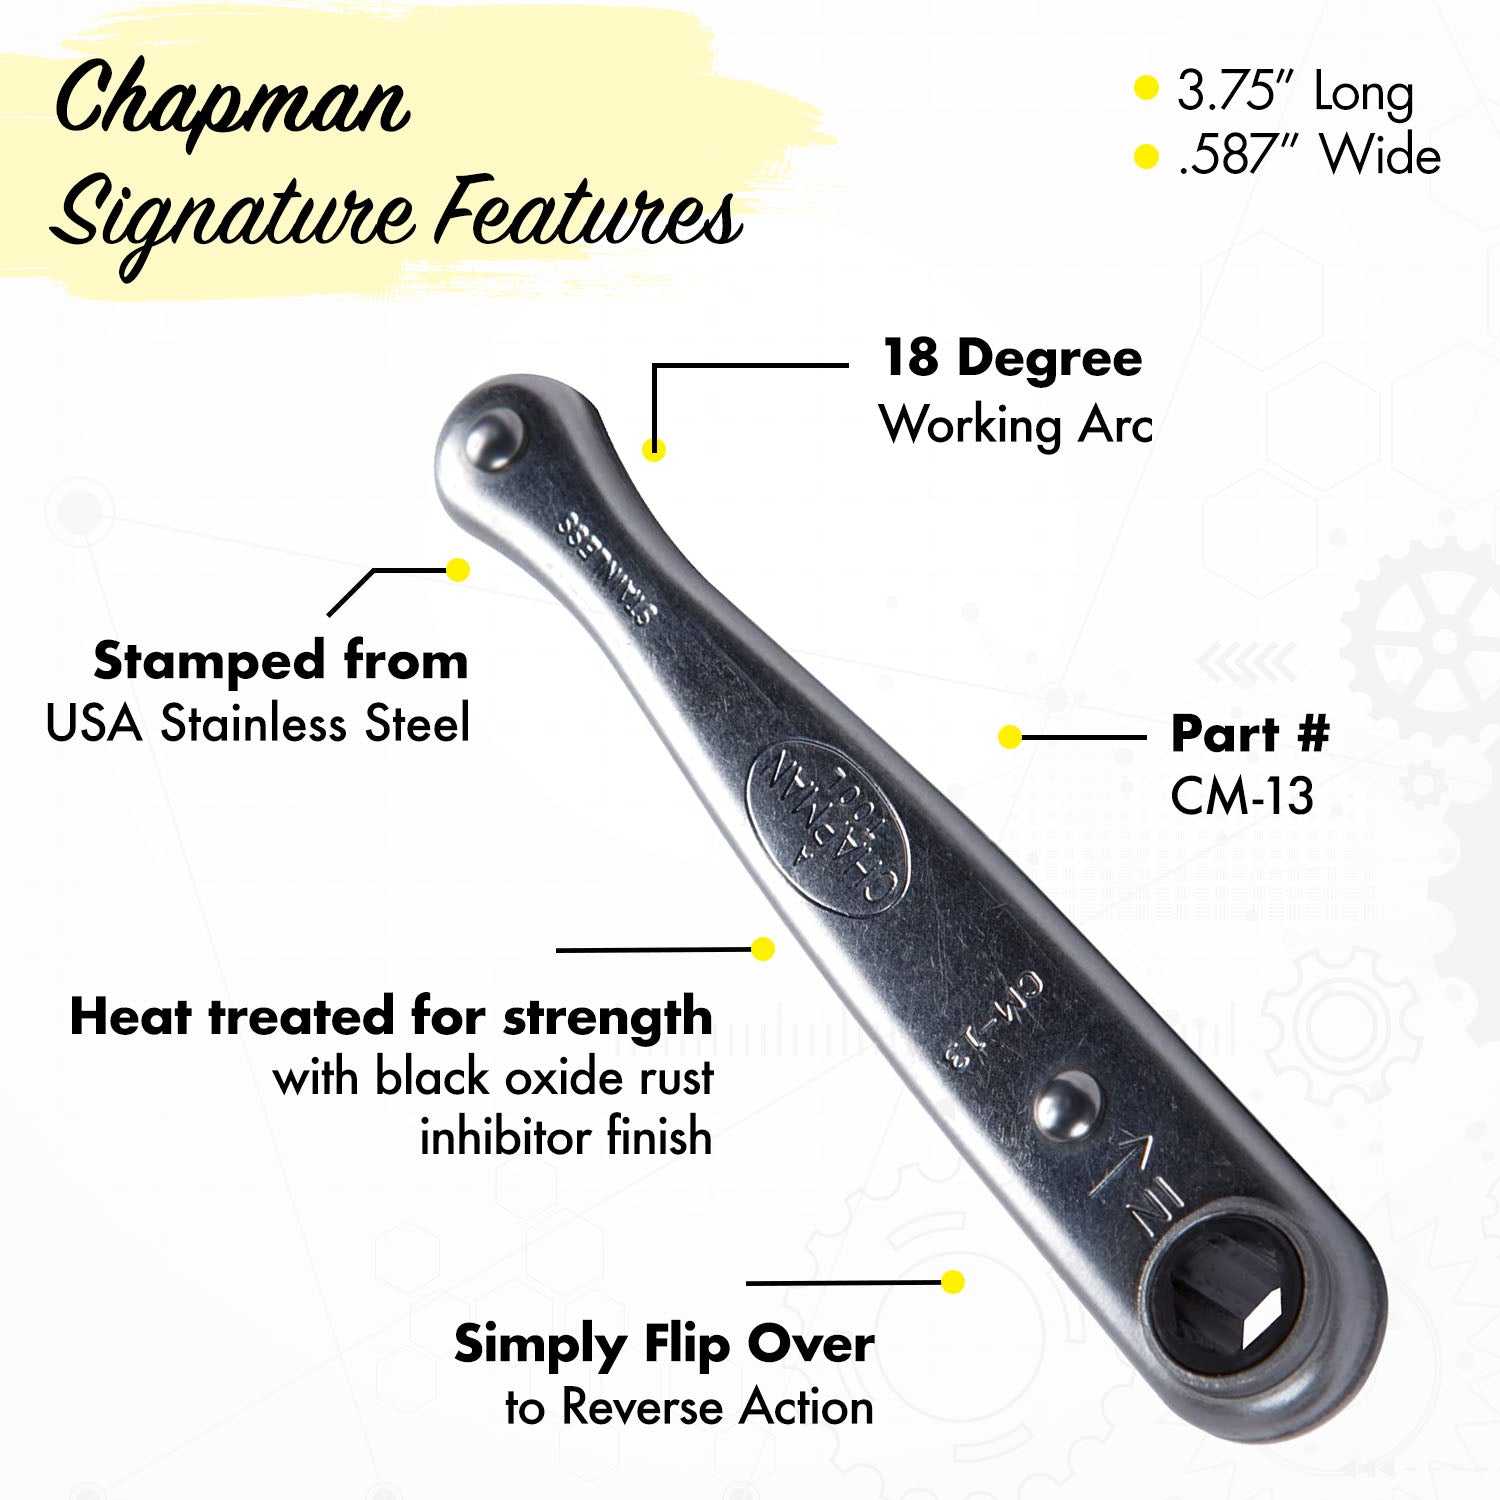 Chapman Signature Features: 1/4" Drive Ratchet • Stamped from USA Stainless Steel • Heat treated with A black oxide rust inhibitor finish • Part # CM-13 | Chapman MFG